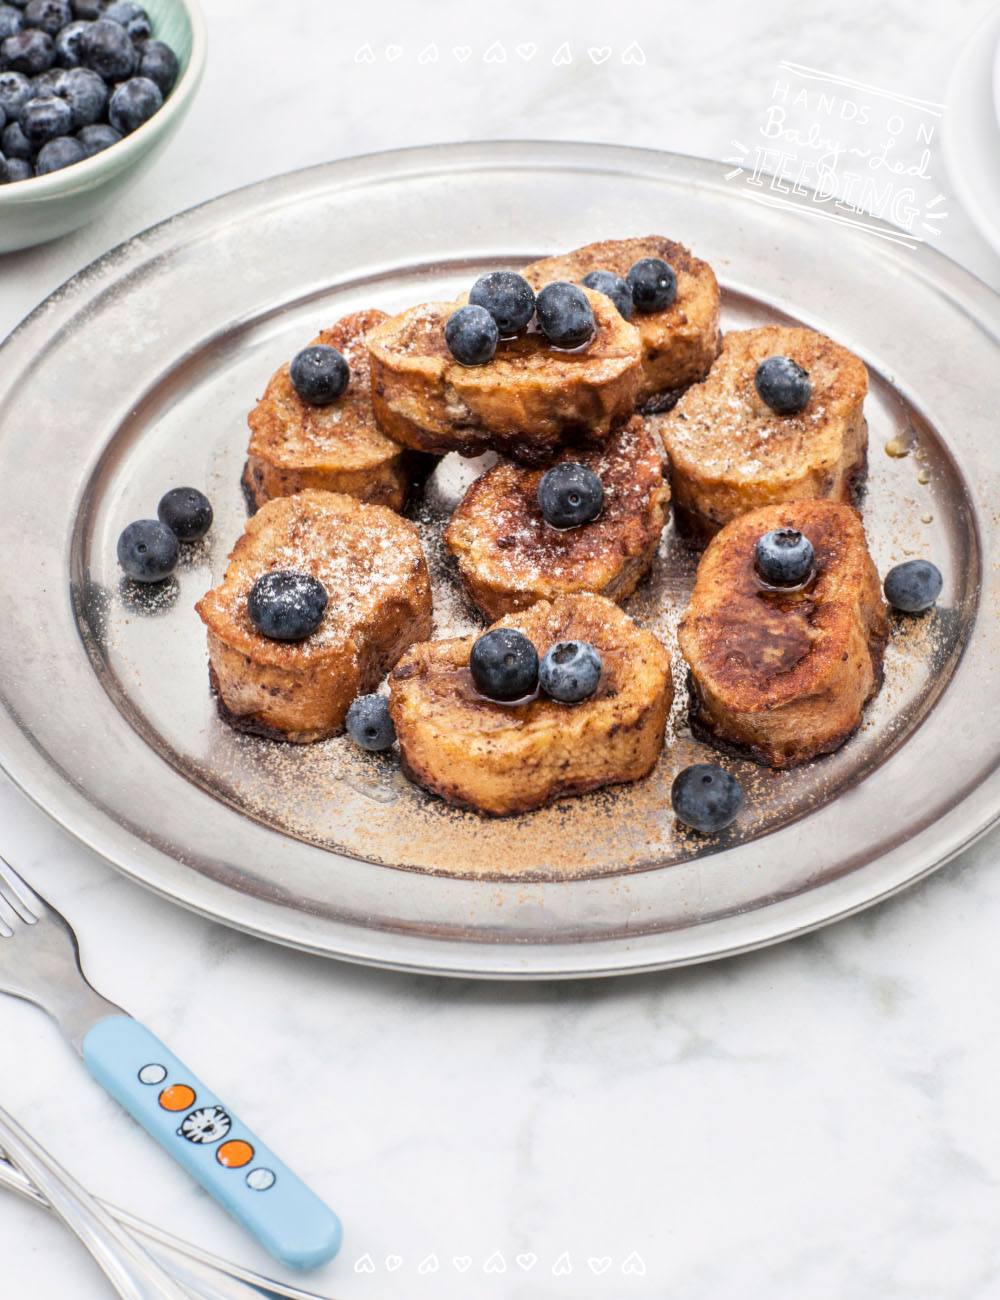 Baby led feeding has great ideas to get your kids to eat better especially breakfast recipe for blw. Full recipe image for recipe page. These Healthy Baby French Toasties with Blueberries are refined sugar free, easy to make and taste so yummy. 